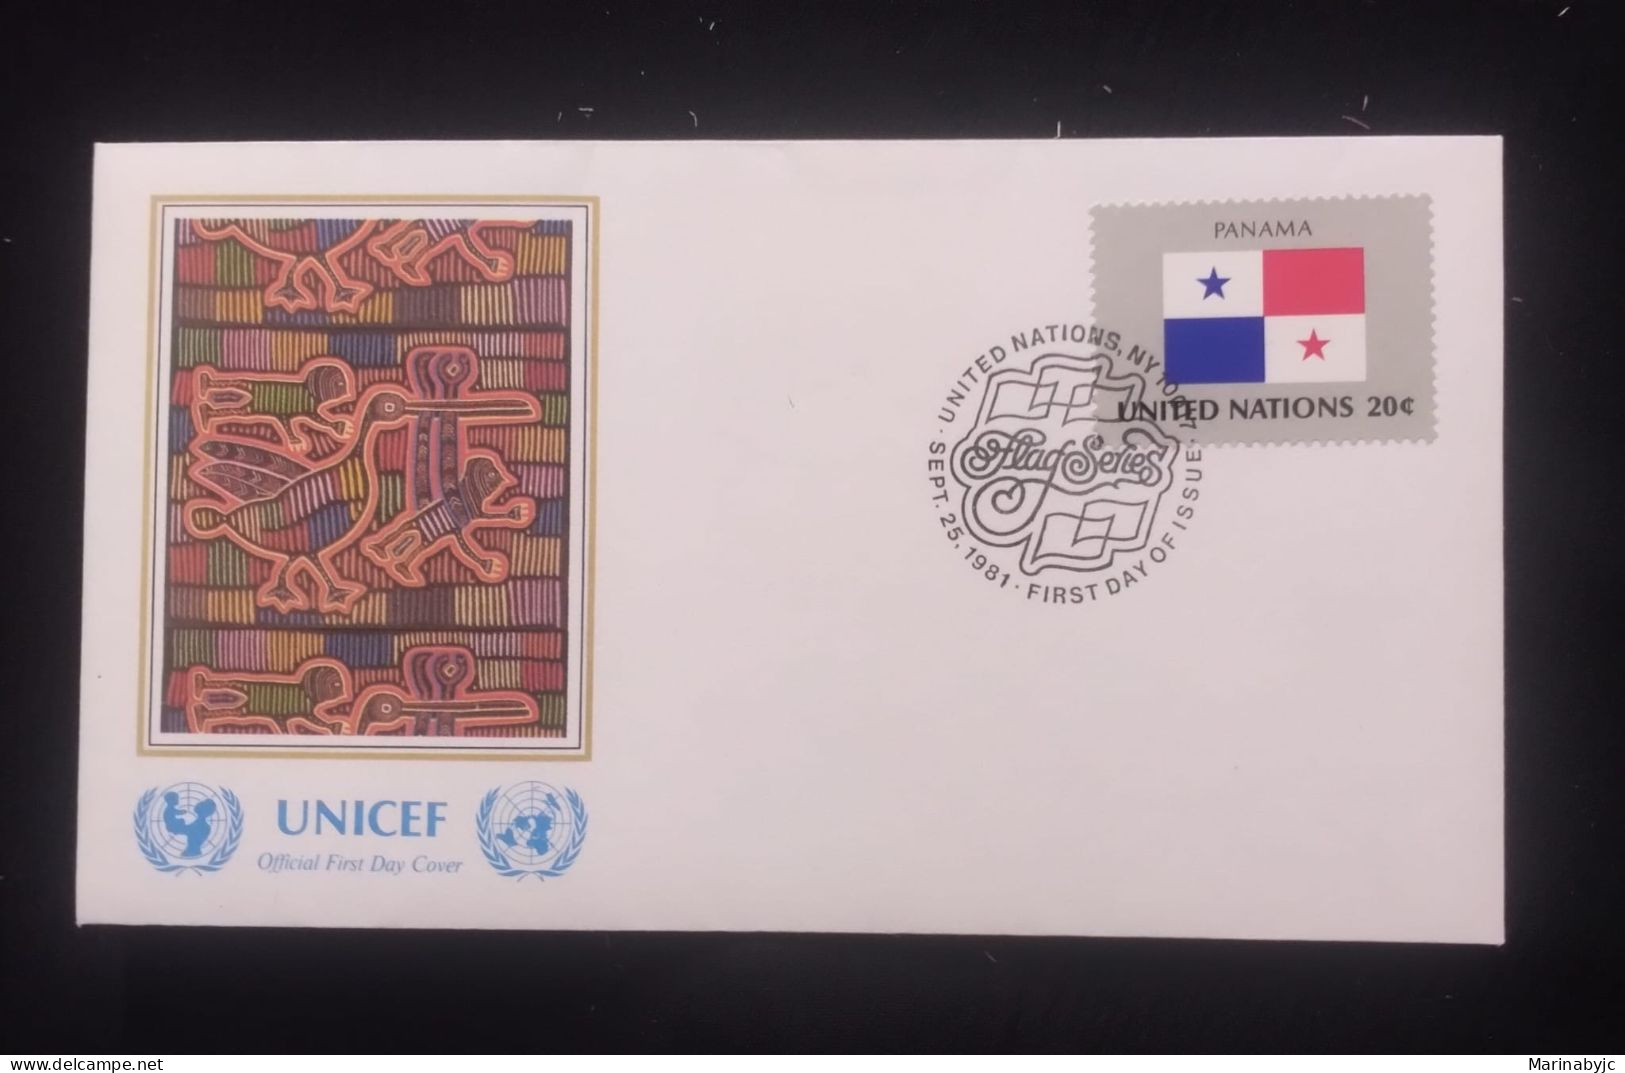 EL)1980 UNITED NATIONS, NATIONAL FLAG OF THE MEMBER COUNTRIES, PANAMA, ART - PAINTING, UNICEF, FDC - Unused Stamps